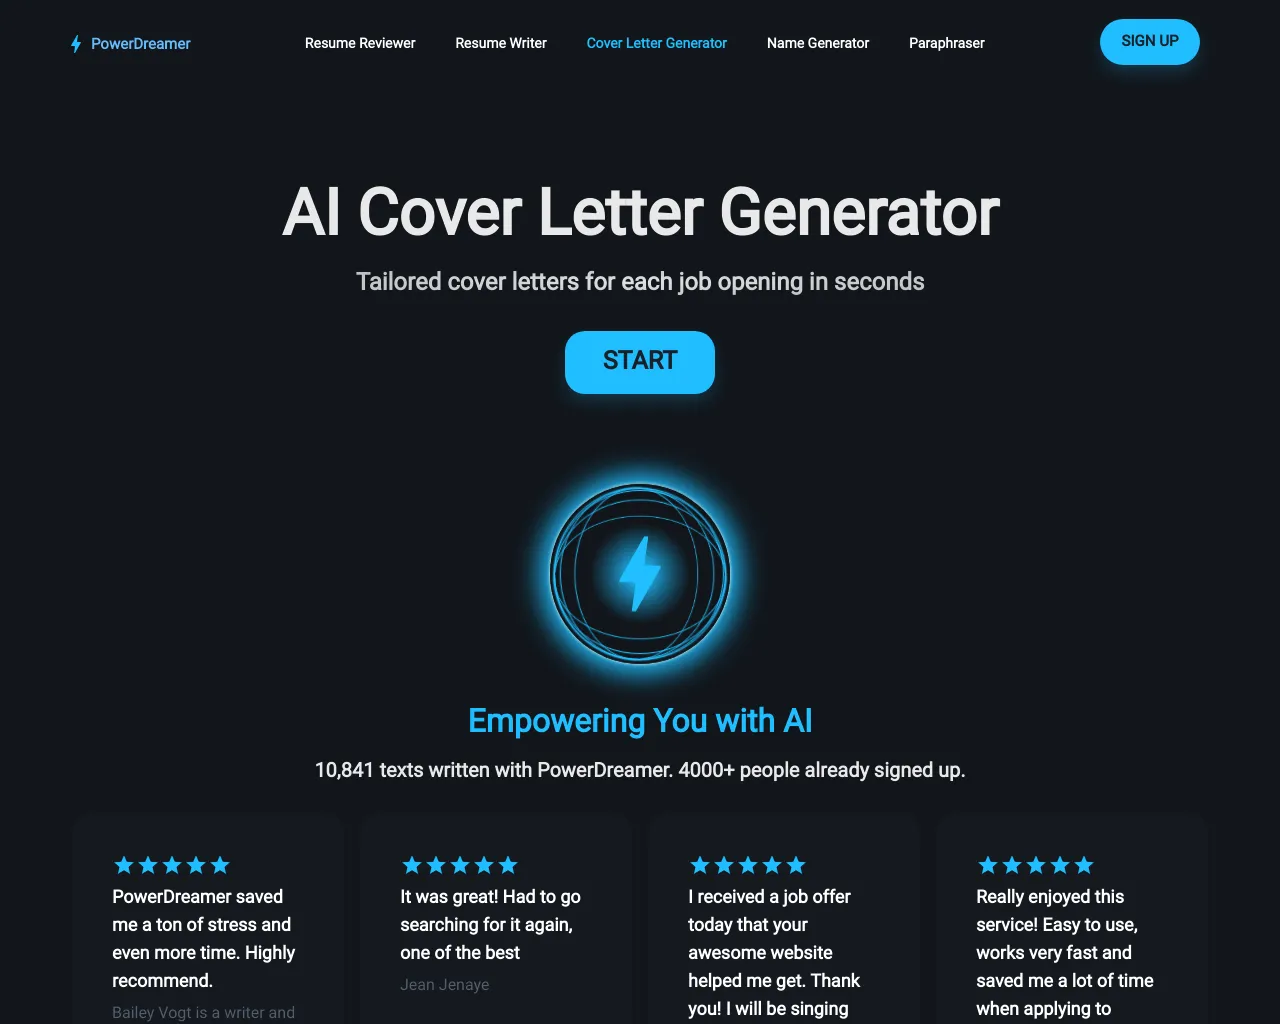 PowerDreamer AI Cover Letter Generator